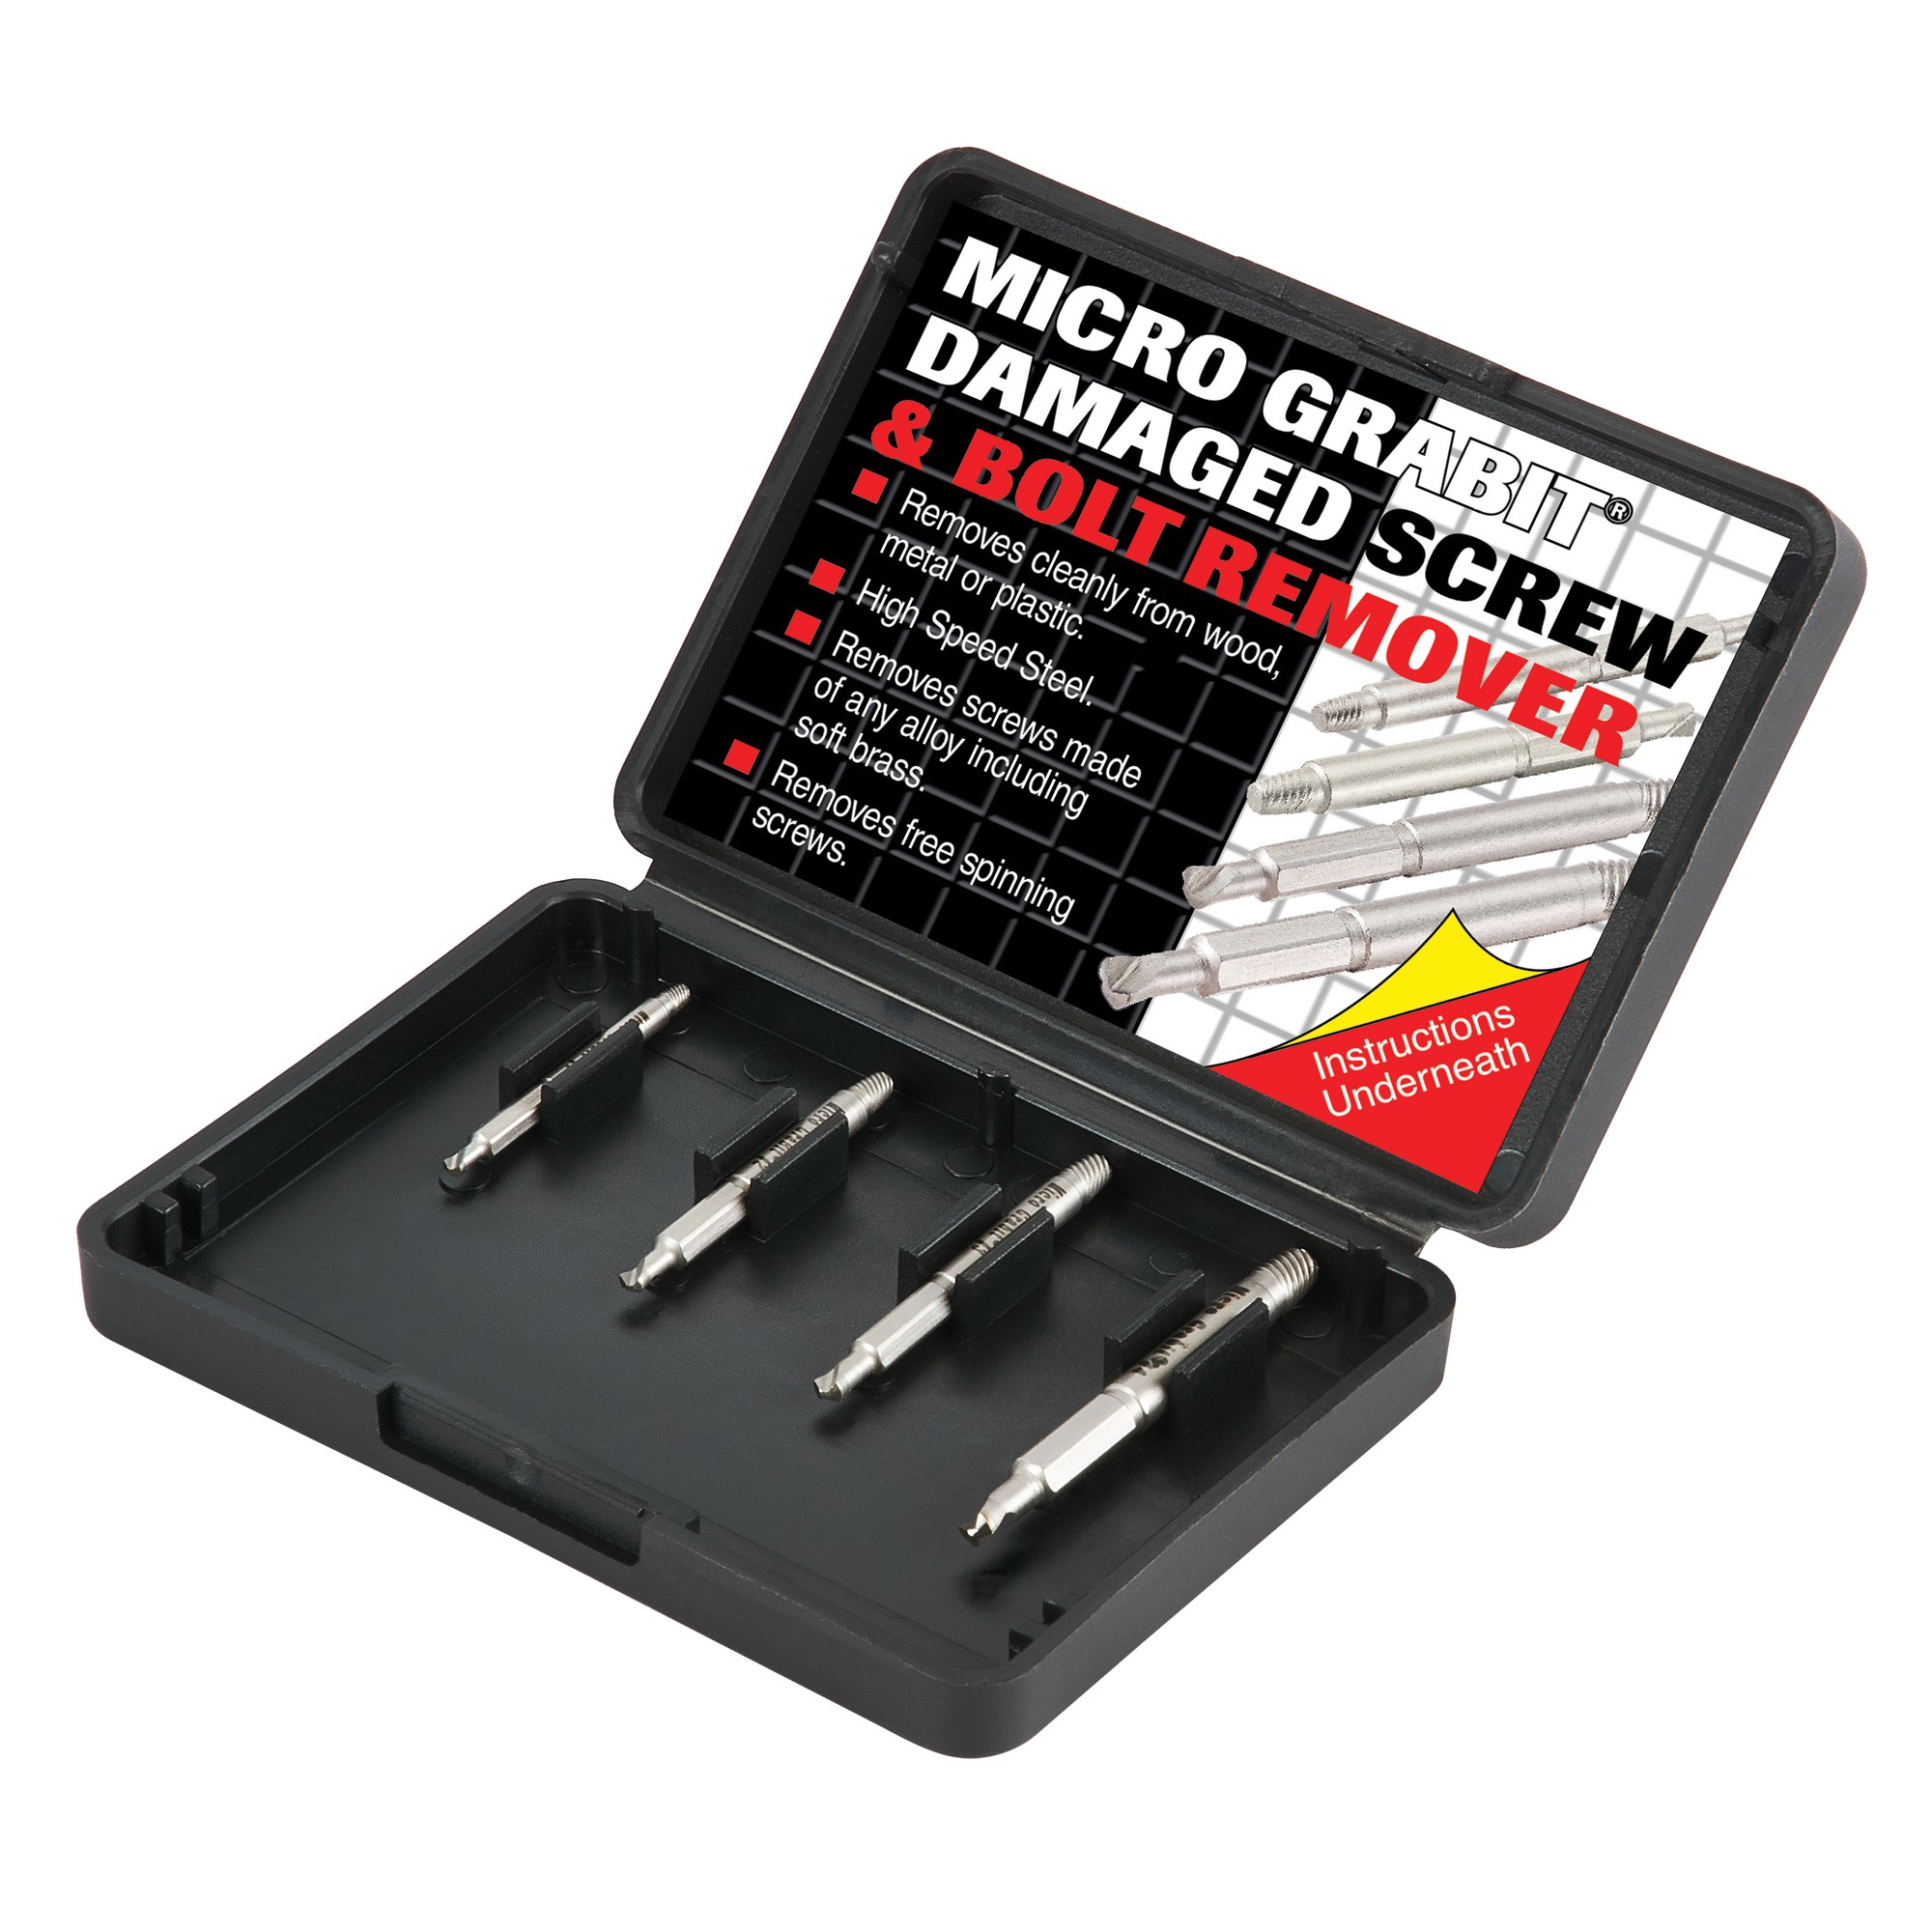 TREND GRAB/ME1/SET GRABIT SCREW EXTRACTOR SET - 4 PIECE SET FOR REMOVING DAMAGED SCREWS AND BOLTS FROM 3MM TO 6MM DIAMETER